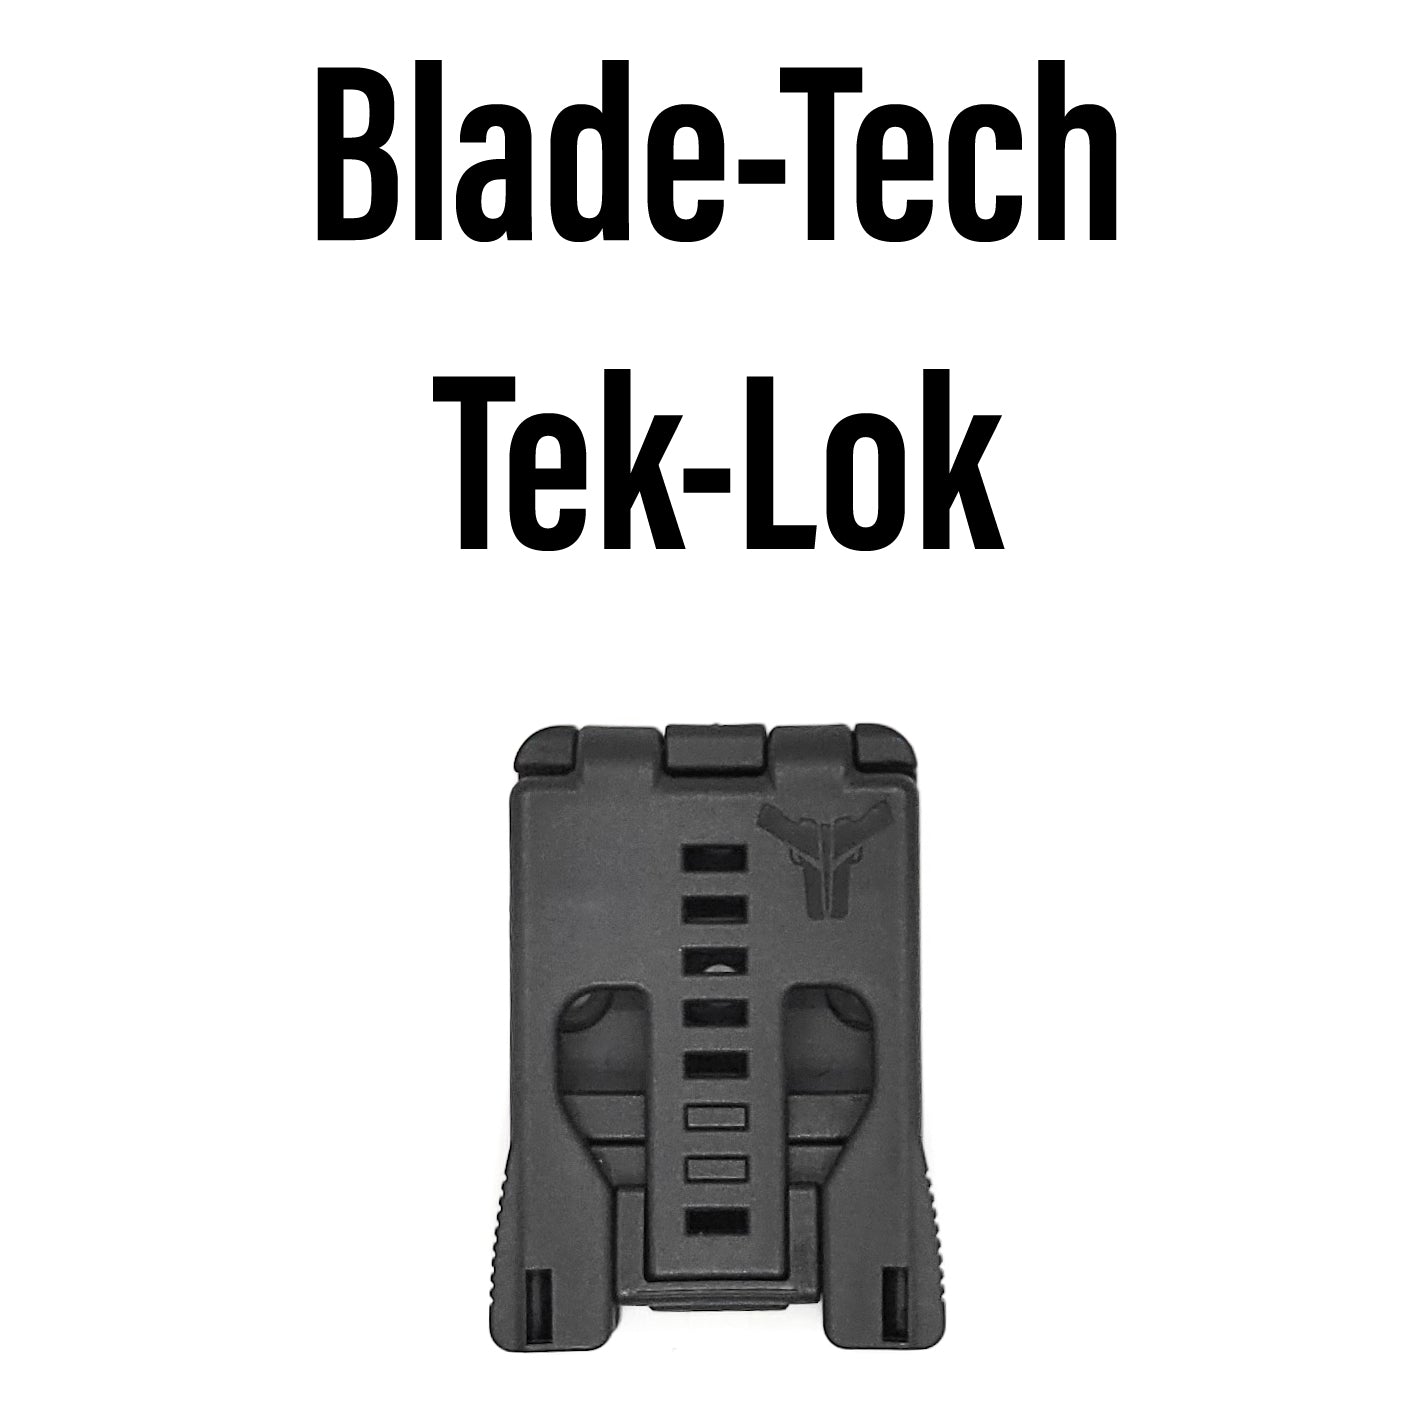 Best Kydex Outside Waistband magazine pouch for Sig P320, P365, P365XL Glock 9mm & 40, Walther, Ruger, S&W, FN magazines. Carrier fits most double stack 9mm or 40 S&W pistol magazines. Tek-Lok Belt attachment fits belts up to 2.25" wide Magazine Retention Device allows for retention adjustment with a 1/8" Allen wrench.